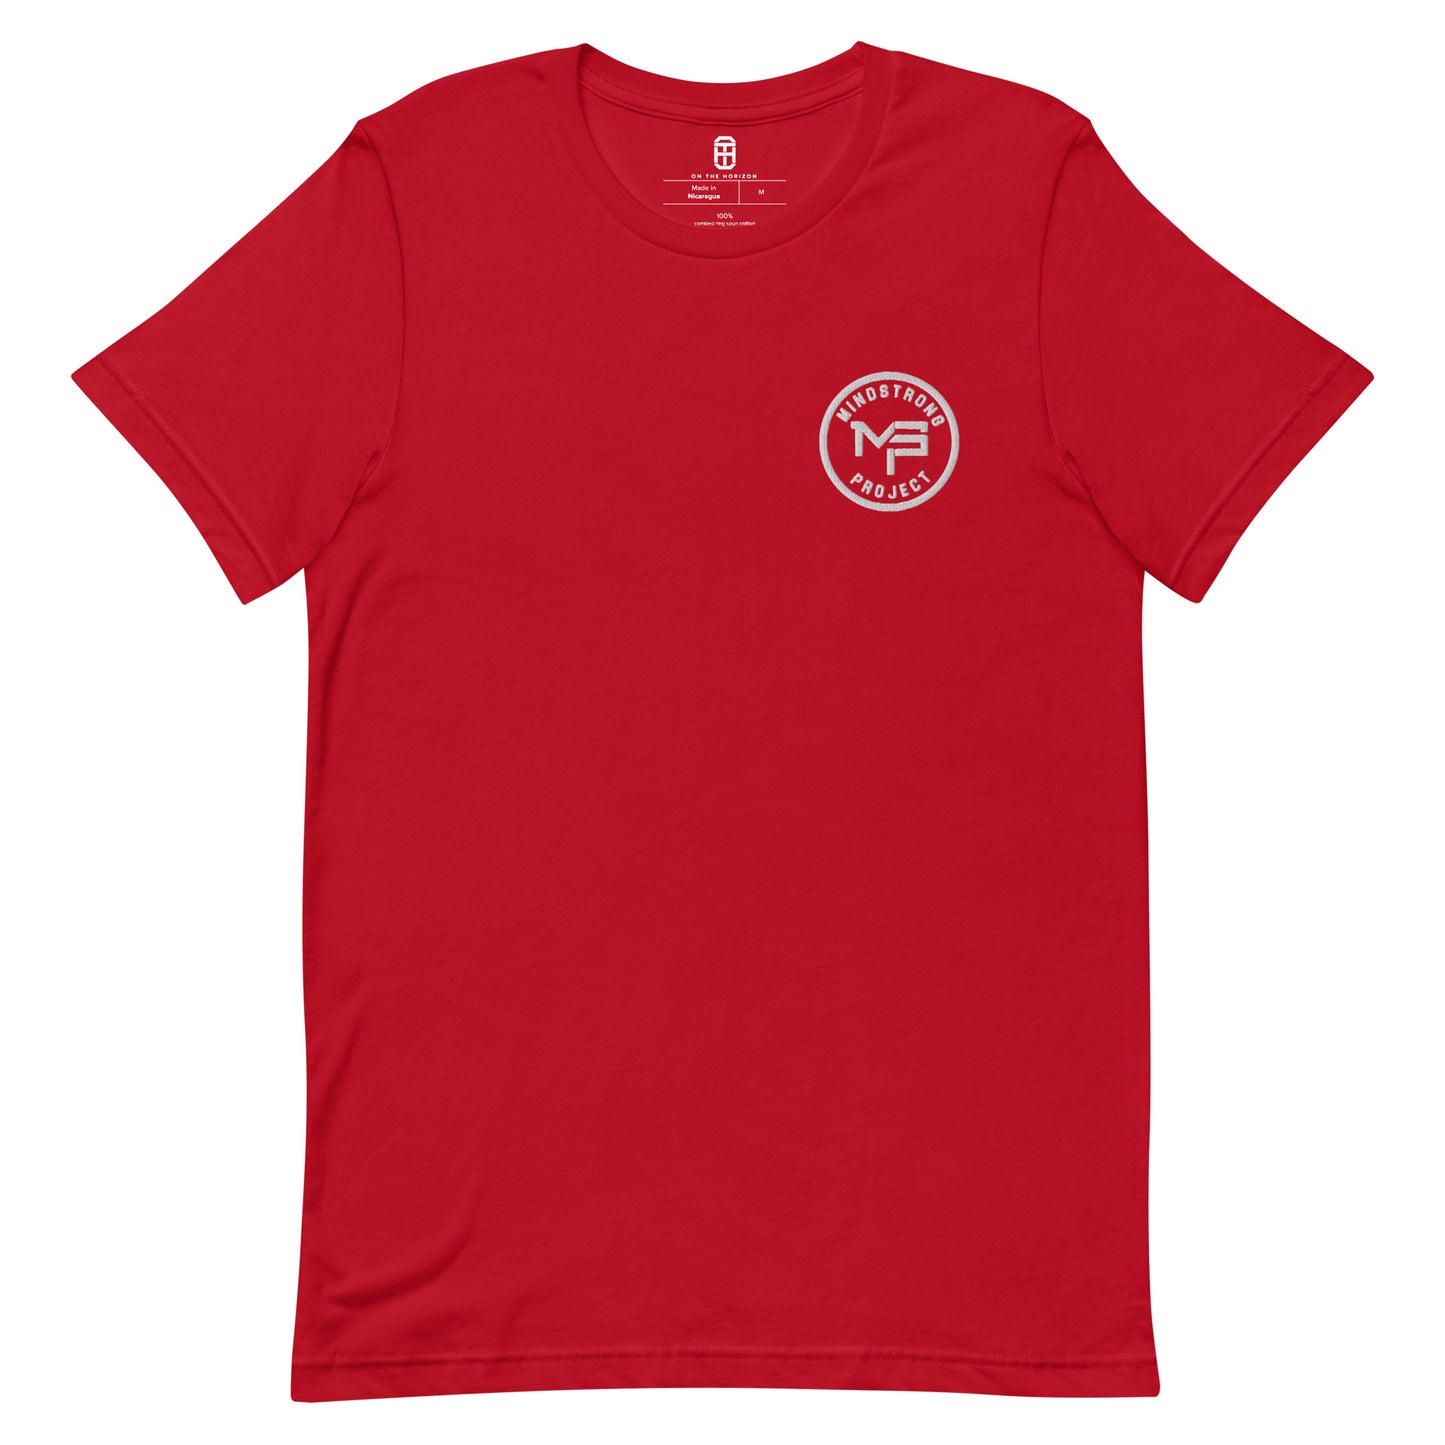 THE MINDSTRONG PROJECT EMBROIDERED LOGO T-SHIRT (MORE COLORS)